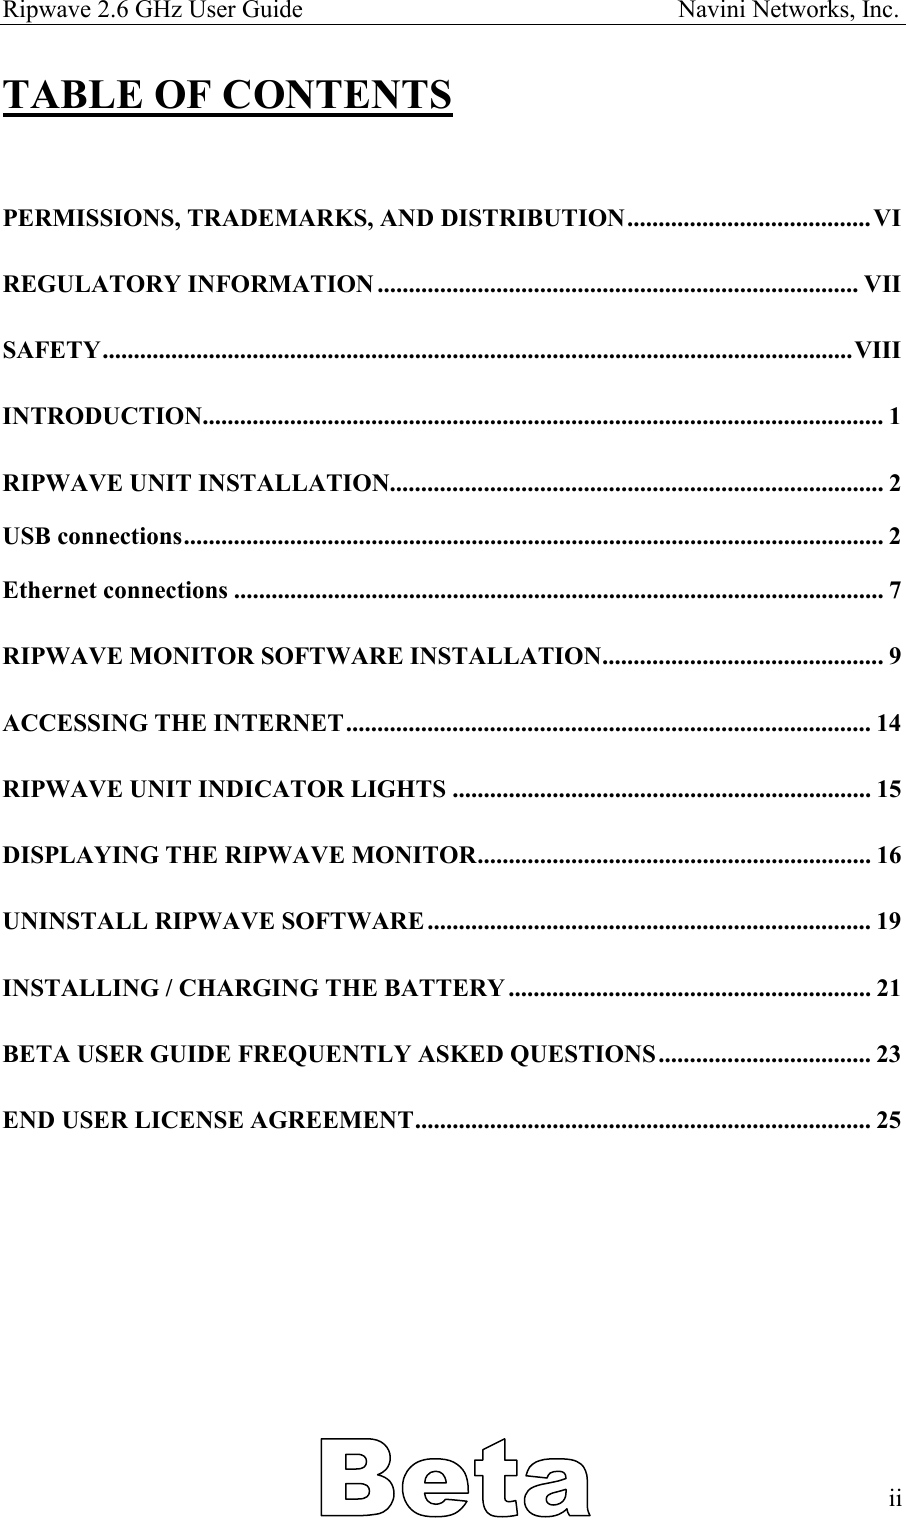 Ripwave 2.6 GHz User Guide                                                            Navini Networks, Inc. TABLE OF CONTENTS  PERMISSIONS, TRADEMARKS, AND DISTRIBUTION.......................................VI REGULATORY INFORMATION ............................................................................. VII SAFETY........................................................................................................................VIII INTRODUCTION............................................................................................................. 1 RIPWAVE UNIT INSTALLATION............................................................................... 2 USB connections................................................................................................................ 2 Ethernet connections ........................................................................................................ 7 RIPWAVE MONITOR SOFTWARE INSTALLATION............................................. 9 ACCESSING THE INTERNET.................................................................................... 14 RIPWAVE UNIT INDICATOR LIGHTS ................................................................... 15 DISPLAYING THE RIPWAVE MONITOR............................................................... 16 UNINSTALL RIPWAVE SOFTWARE....................................................................... 19 INSTALLING / CHARGING THE BATTERY.......................................................... 21 BETA USER GUIDE FREQUENTLY ASKED QUESTIONS.................................. 23 END USER LICENSE AGREEMENT......................................................................... 25            ii   